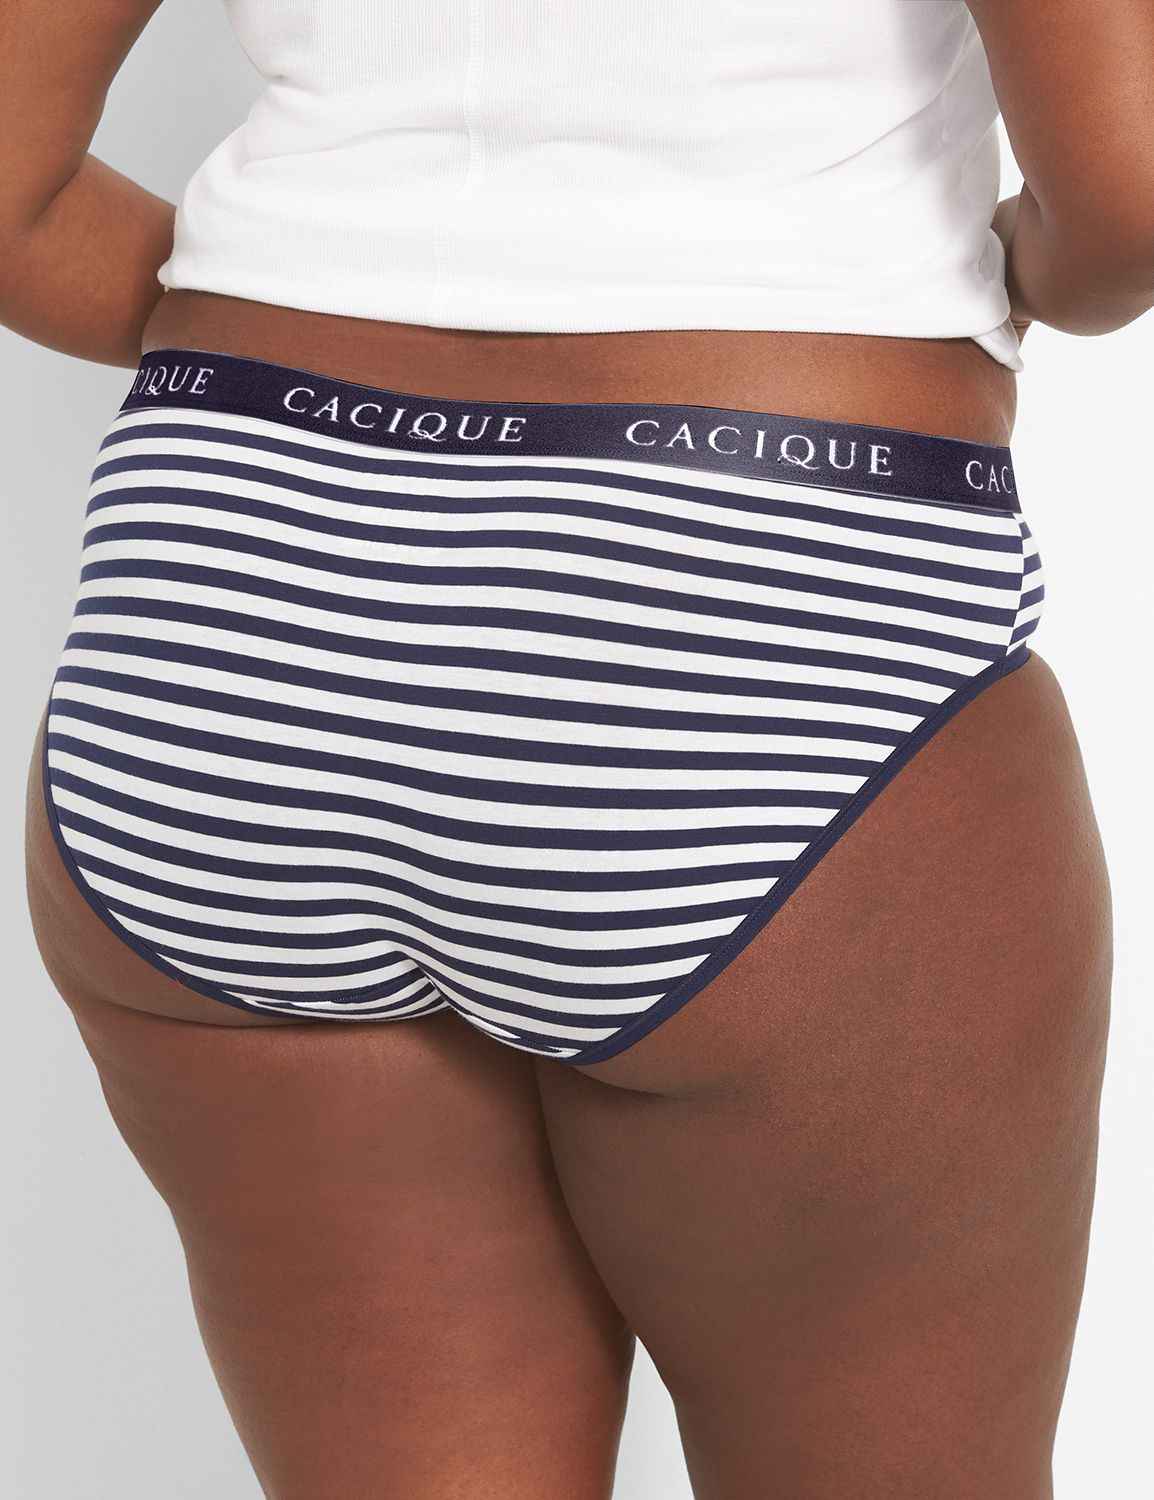 NEW LANE BRYANT CACIQUE SIZE 22/24 HEATHER GRAY LOGO COTTON HIPSTER PANTY